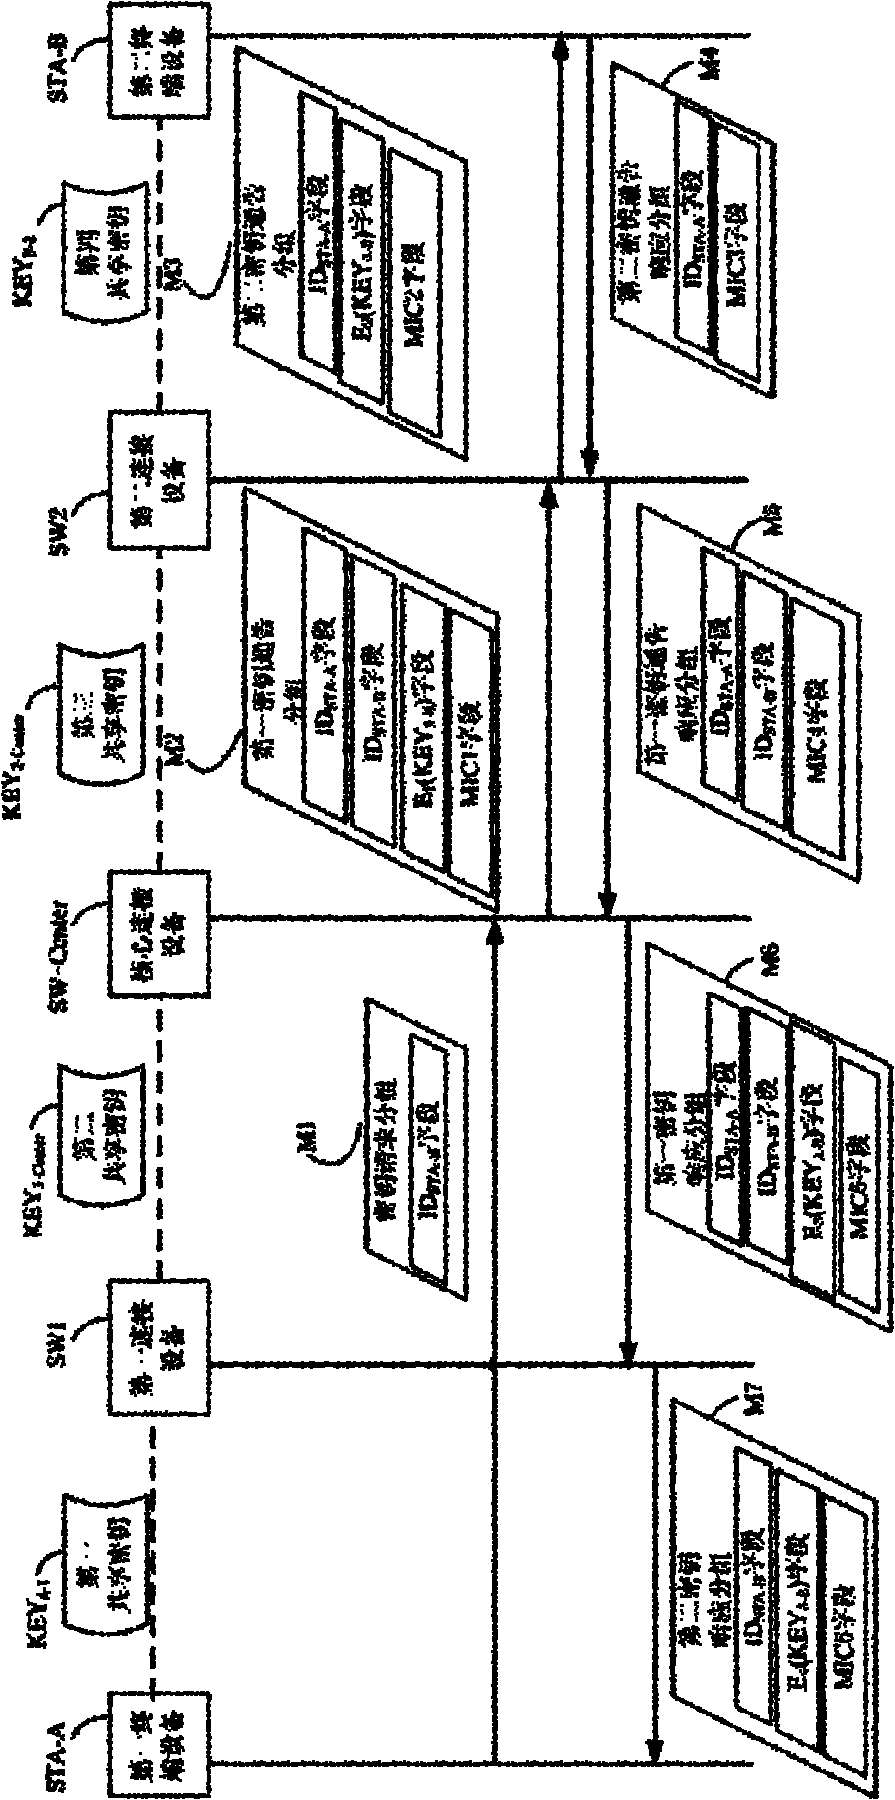 Centralized safety connection establishing system and method